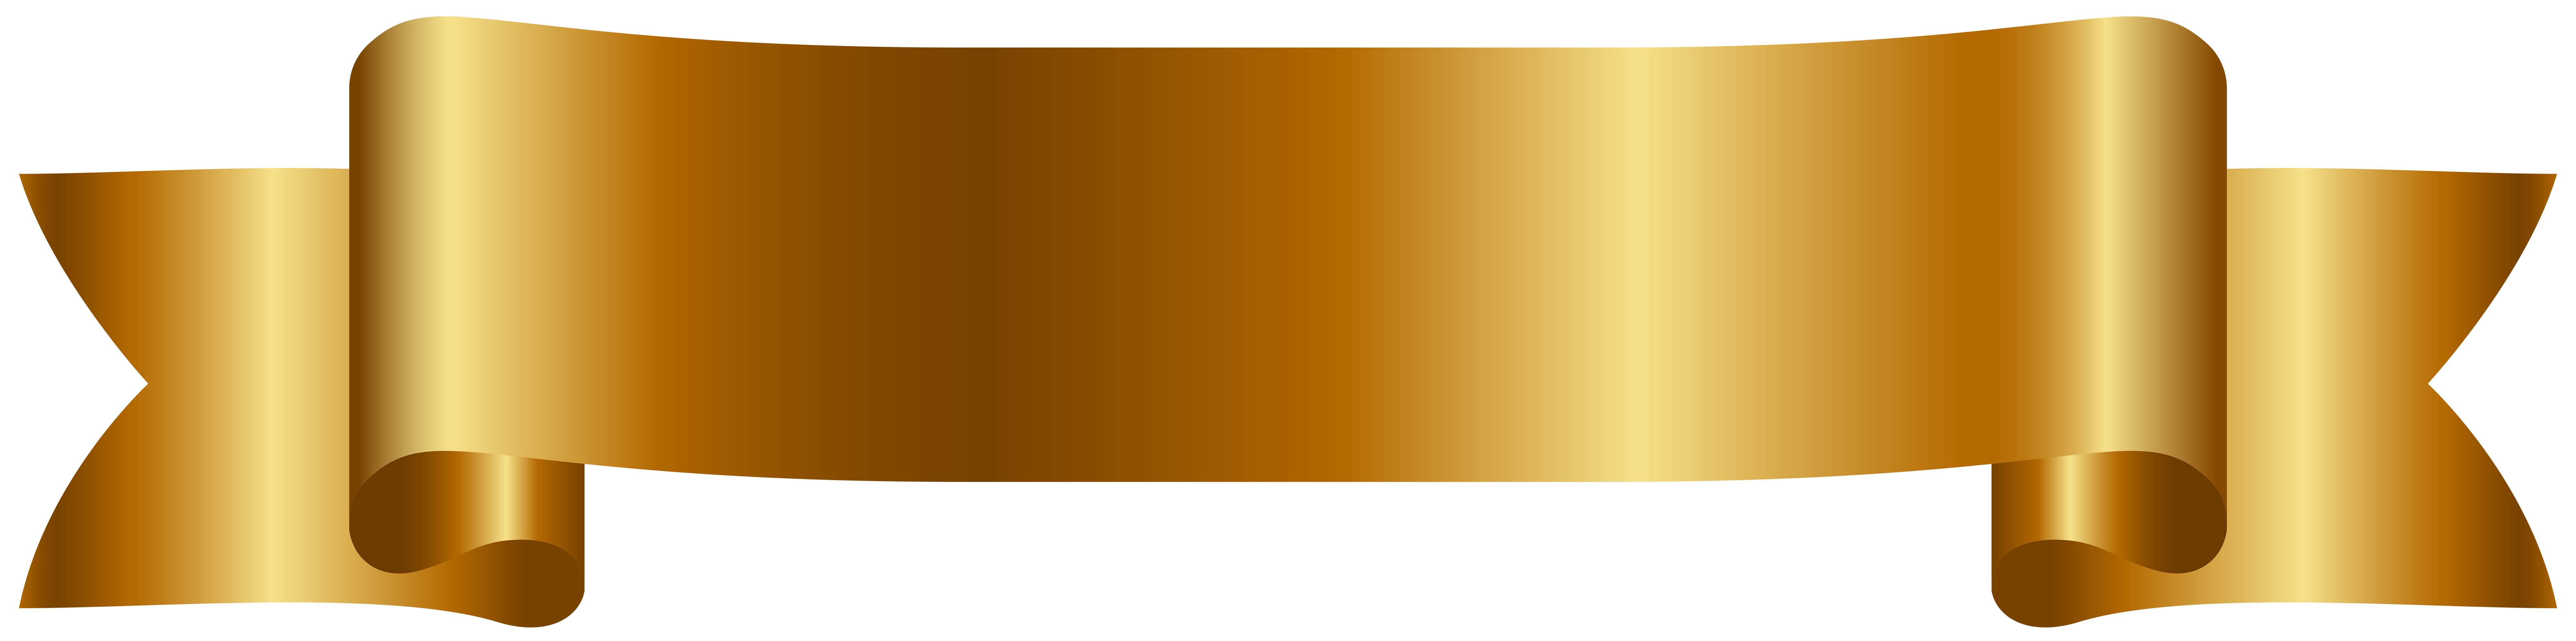 Free Golden Banner Cliparts, Download Free Clip Art, Free